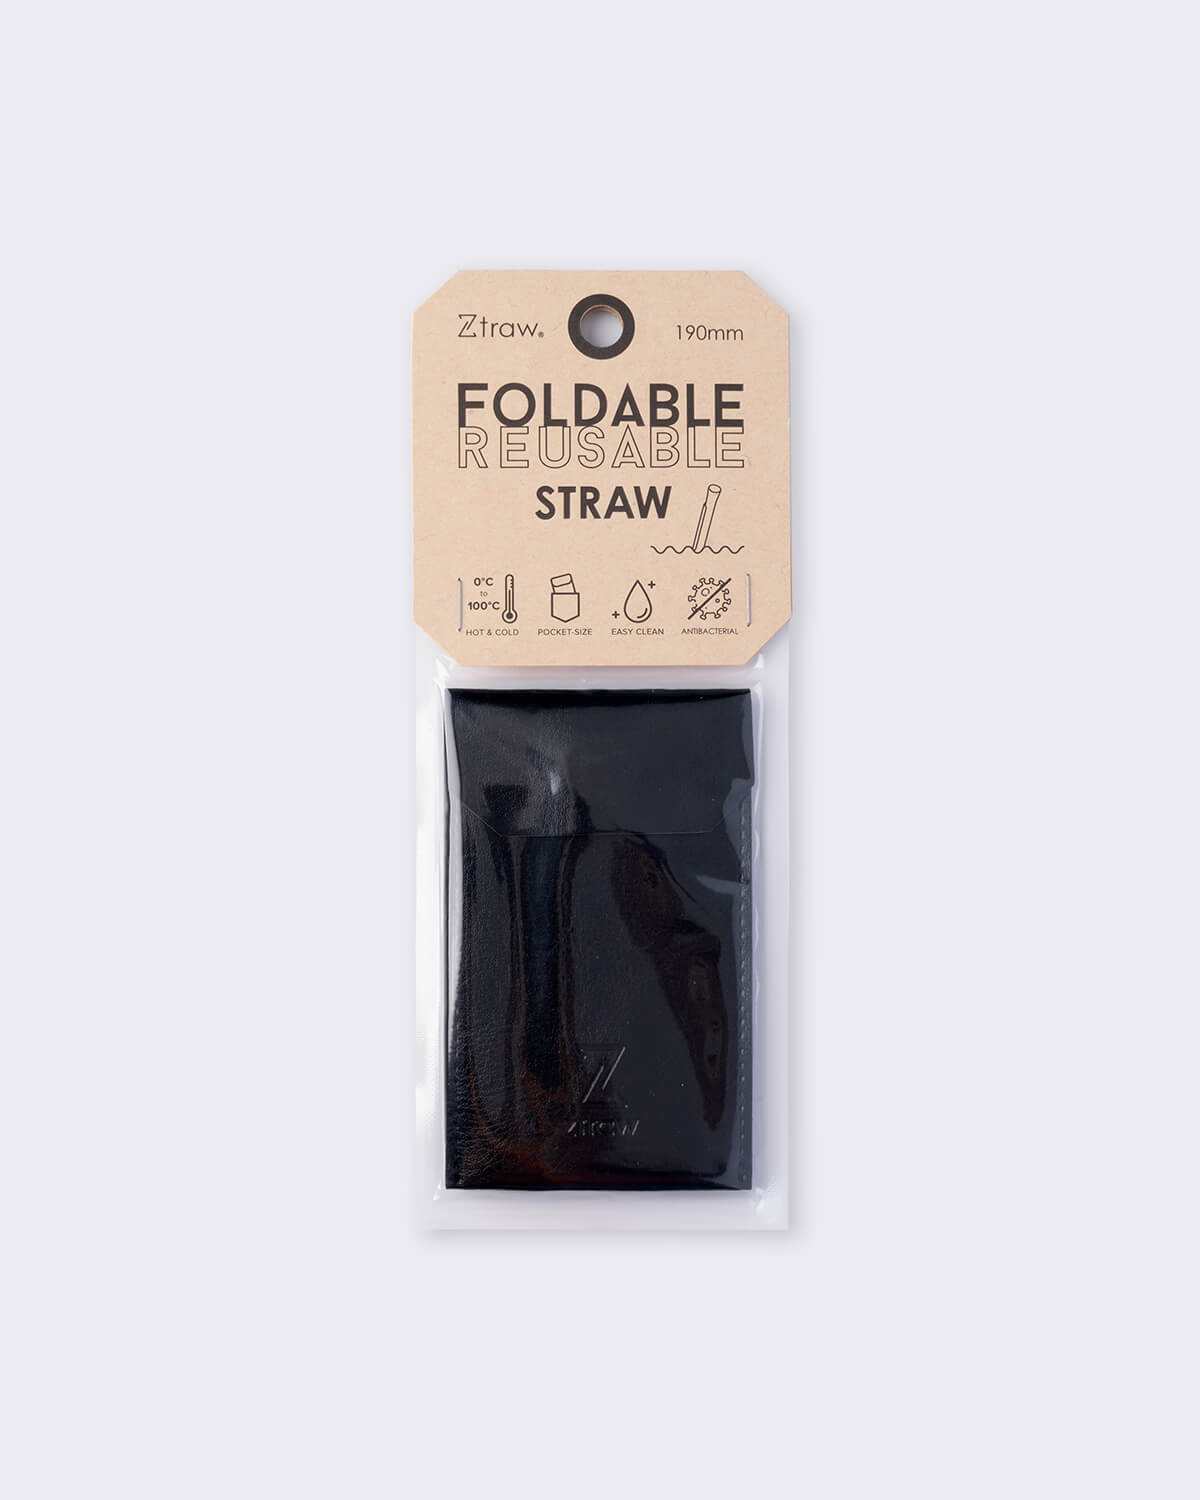 Ztraw Foldable Reusable Straw With Pouch